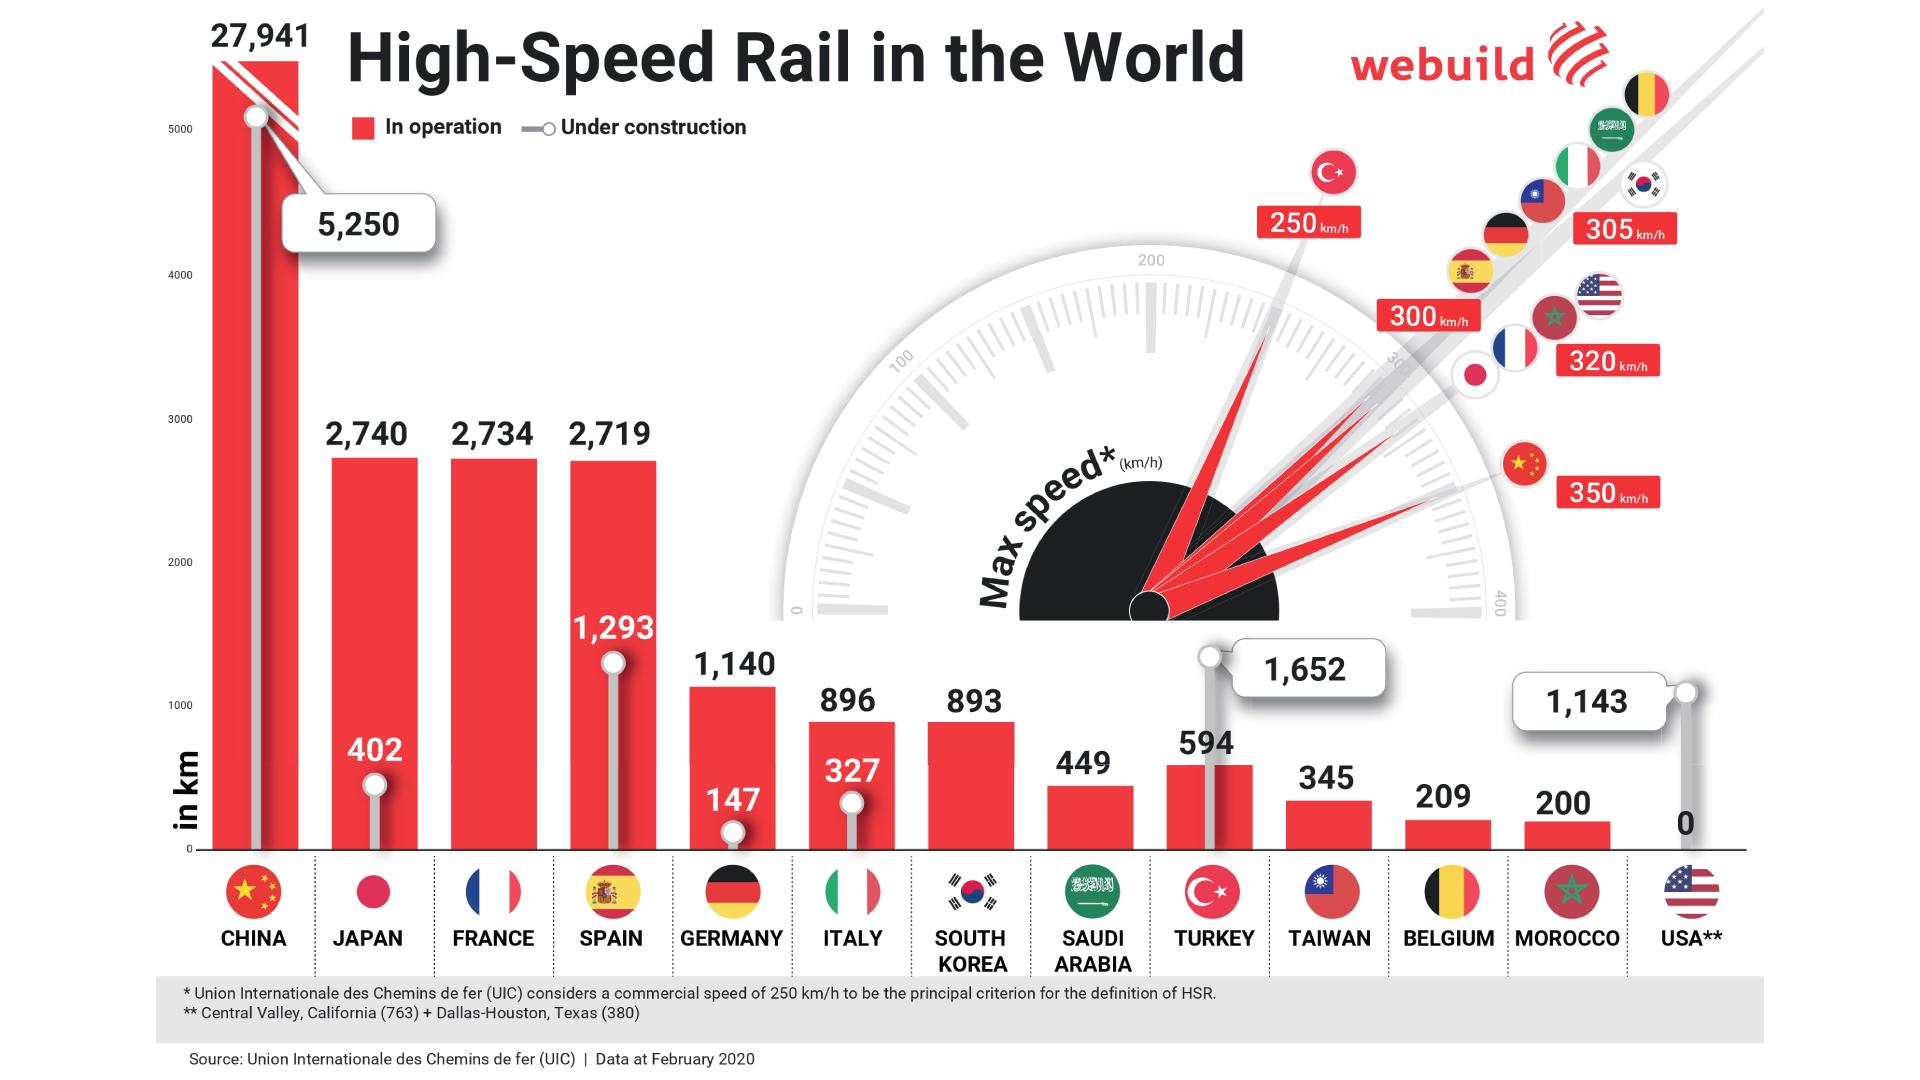 High-Speed Rail in the World